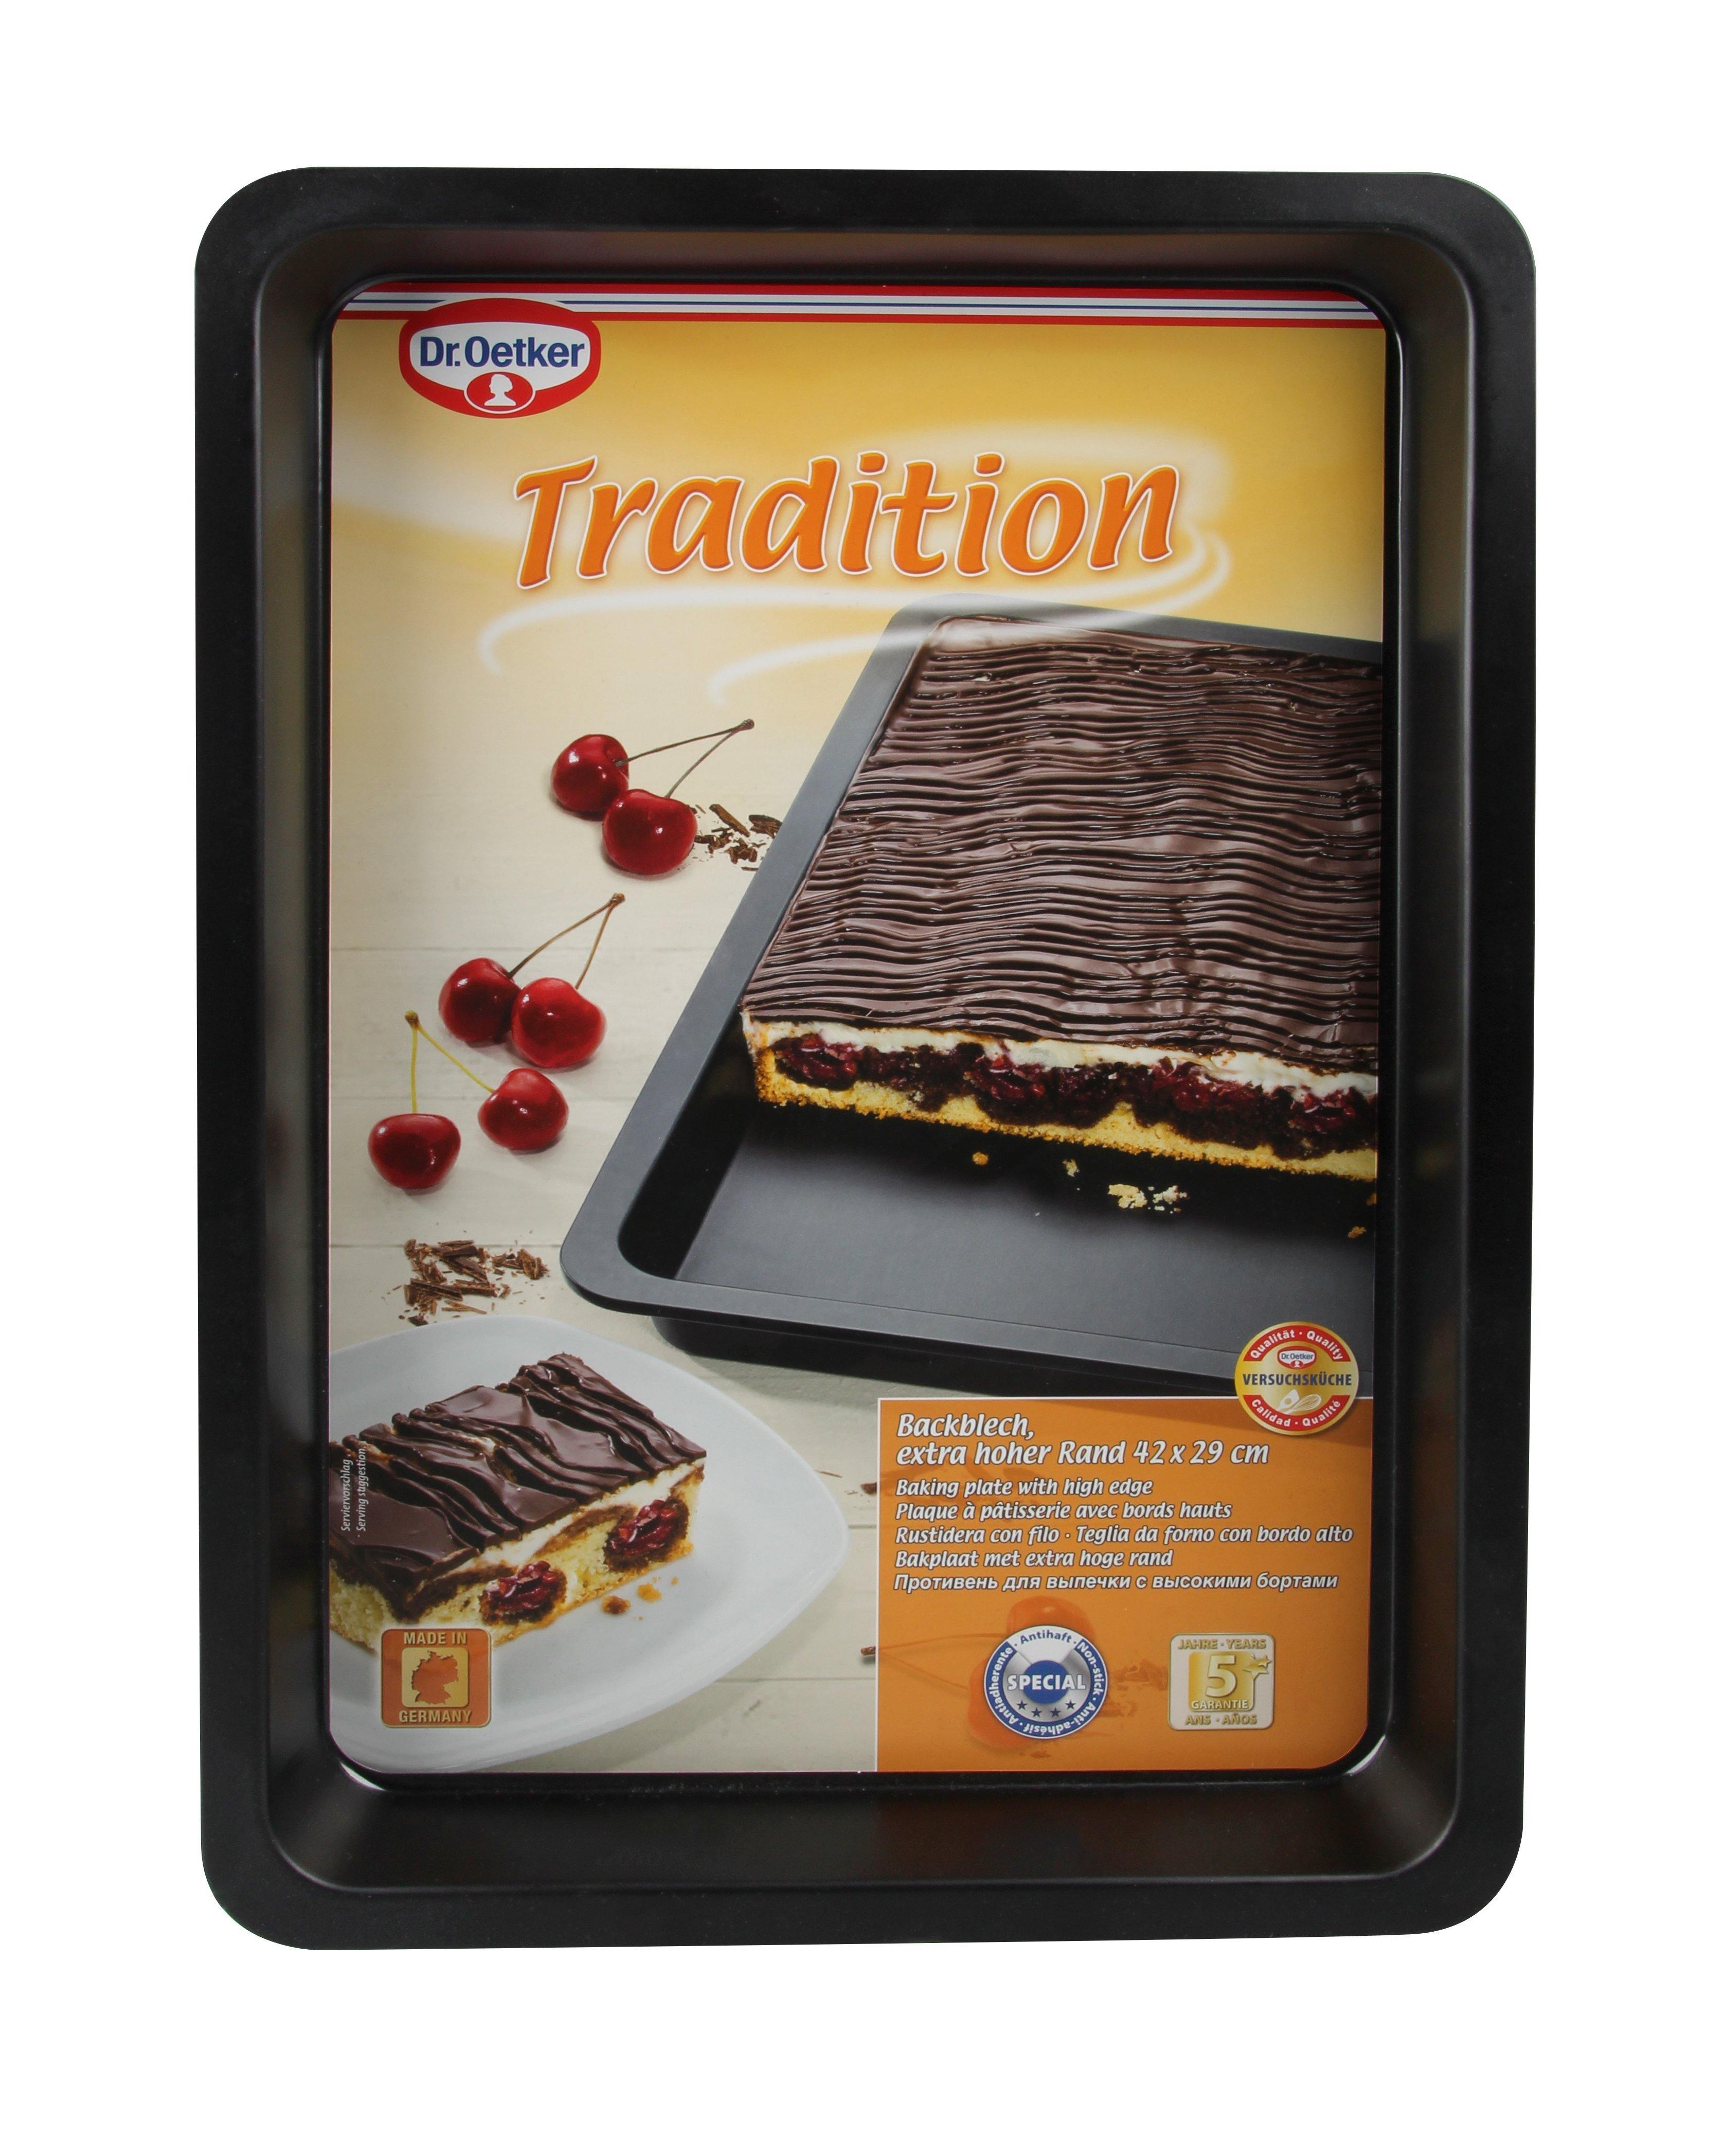 Dr. Oetker "Tradition" Baking Tray With Extra High Rim, Grey/Black, 42X29X4 Cm - Whole and All